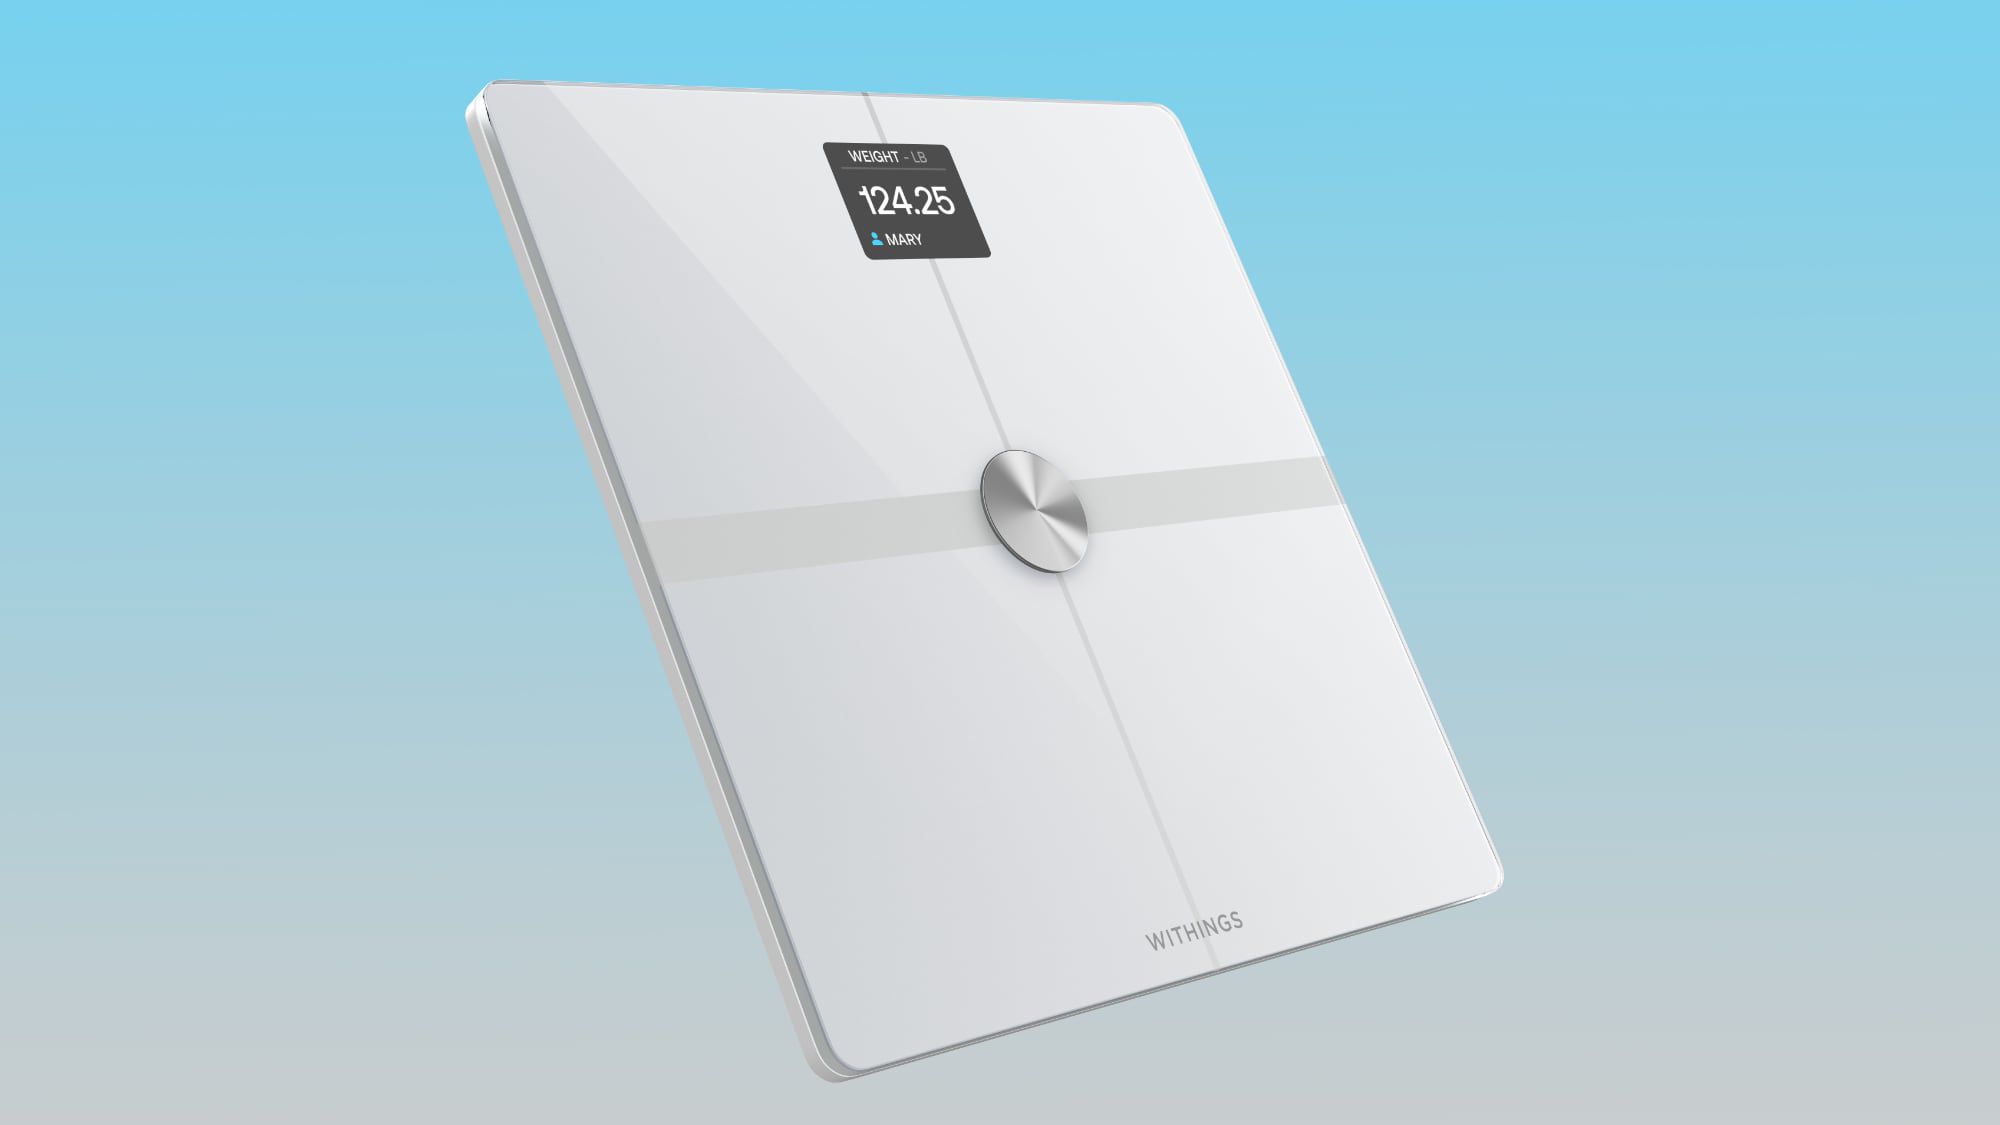 Withings Launches New iPhone-Connected Smart Scale With 'Eyes Closed' Mode - macrumors.com